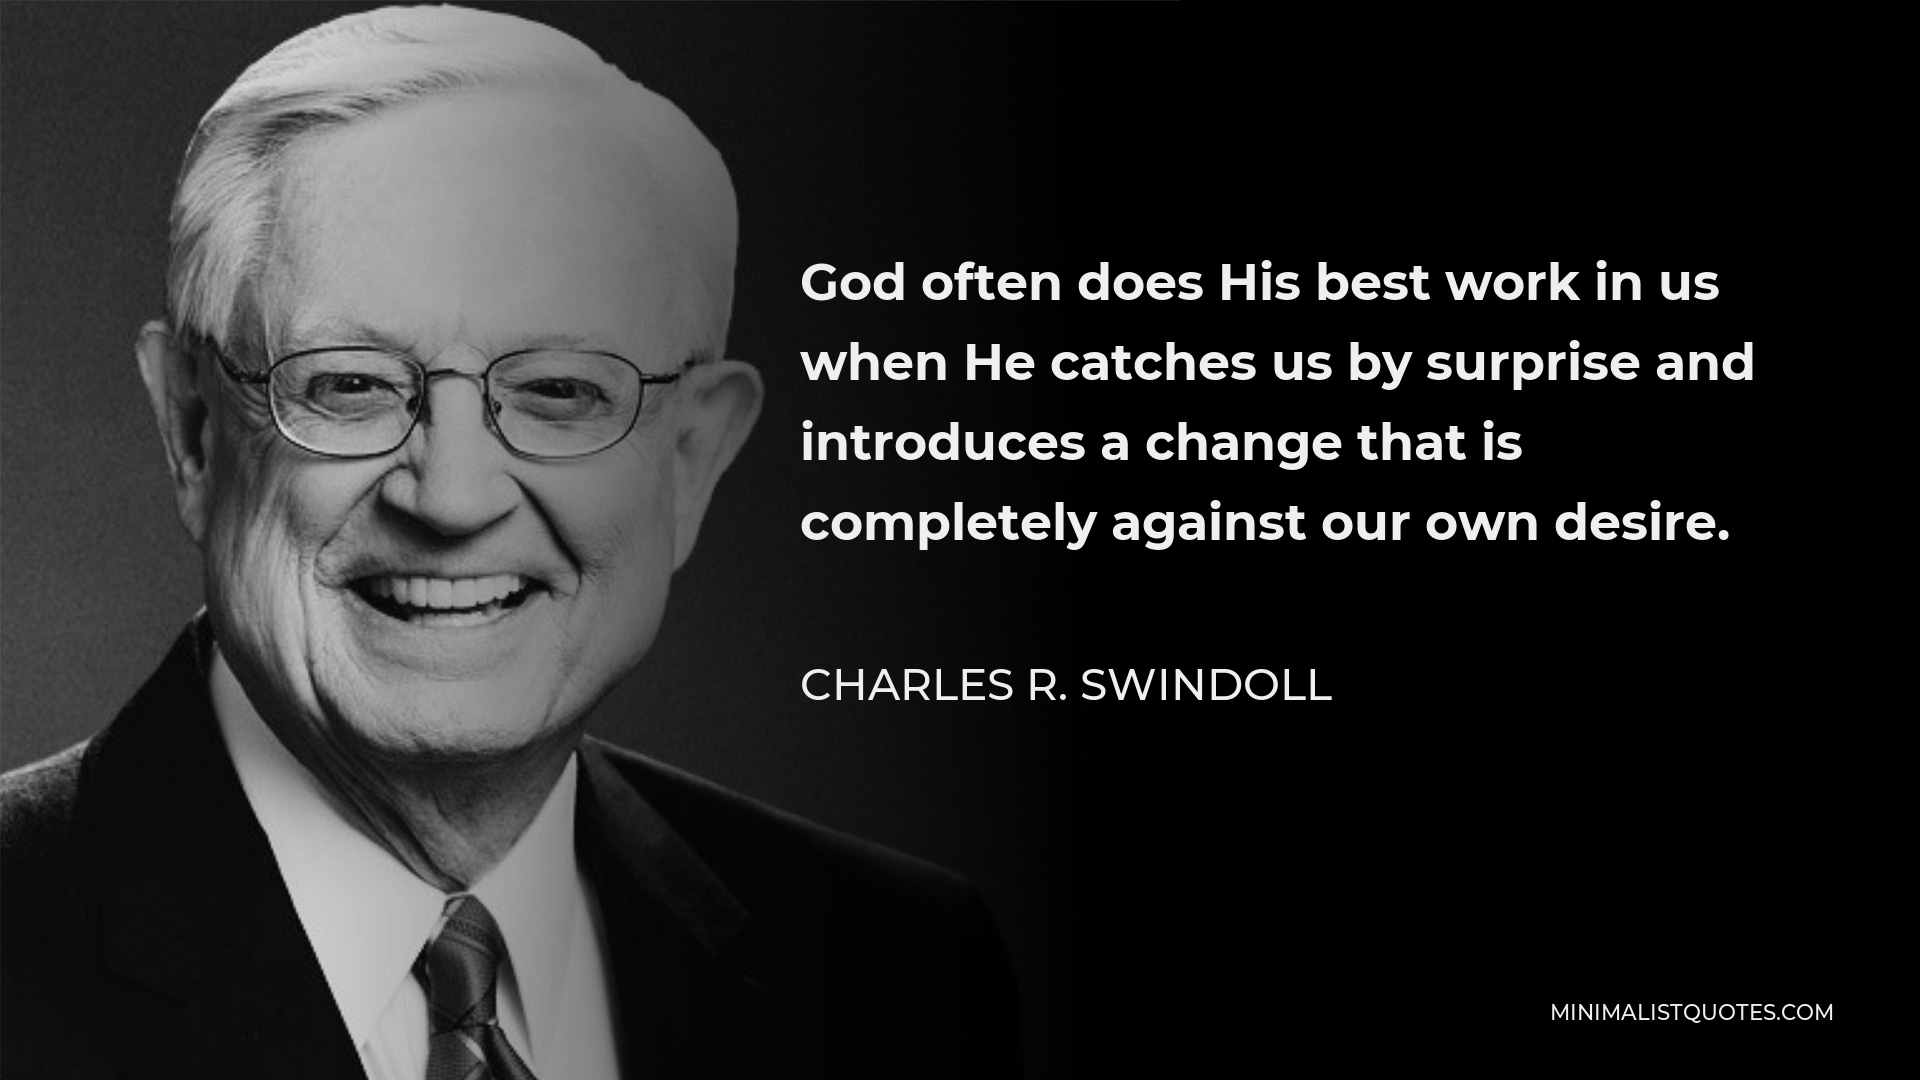 Charles R. Swindoll Quote - God often does His best work in us when He catches us by surprise and introduces a change that is completely against our own desire.